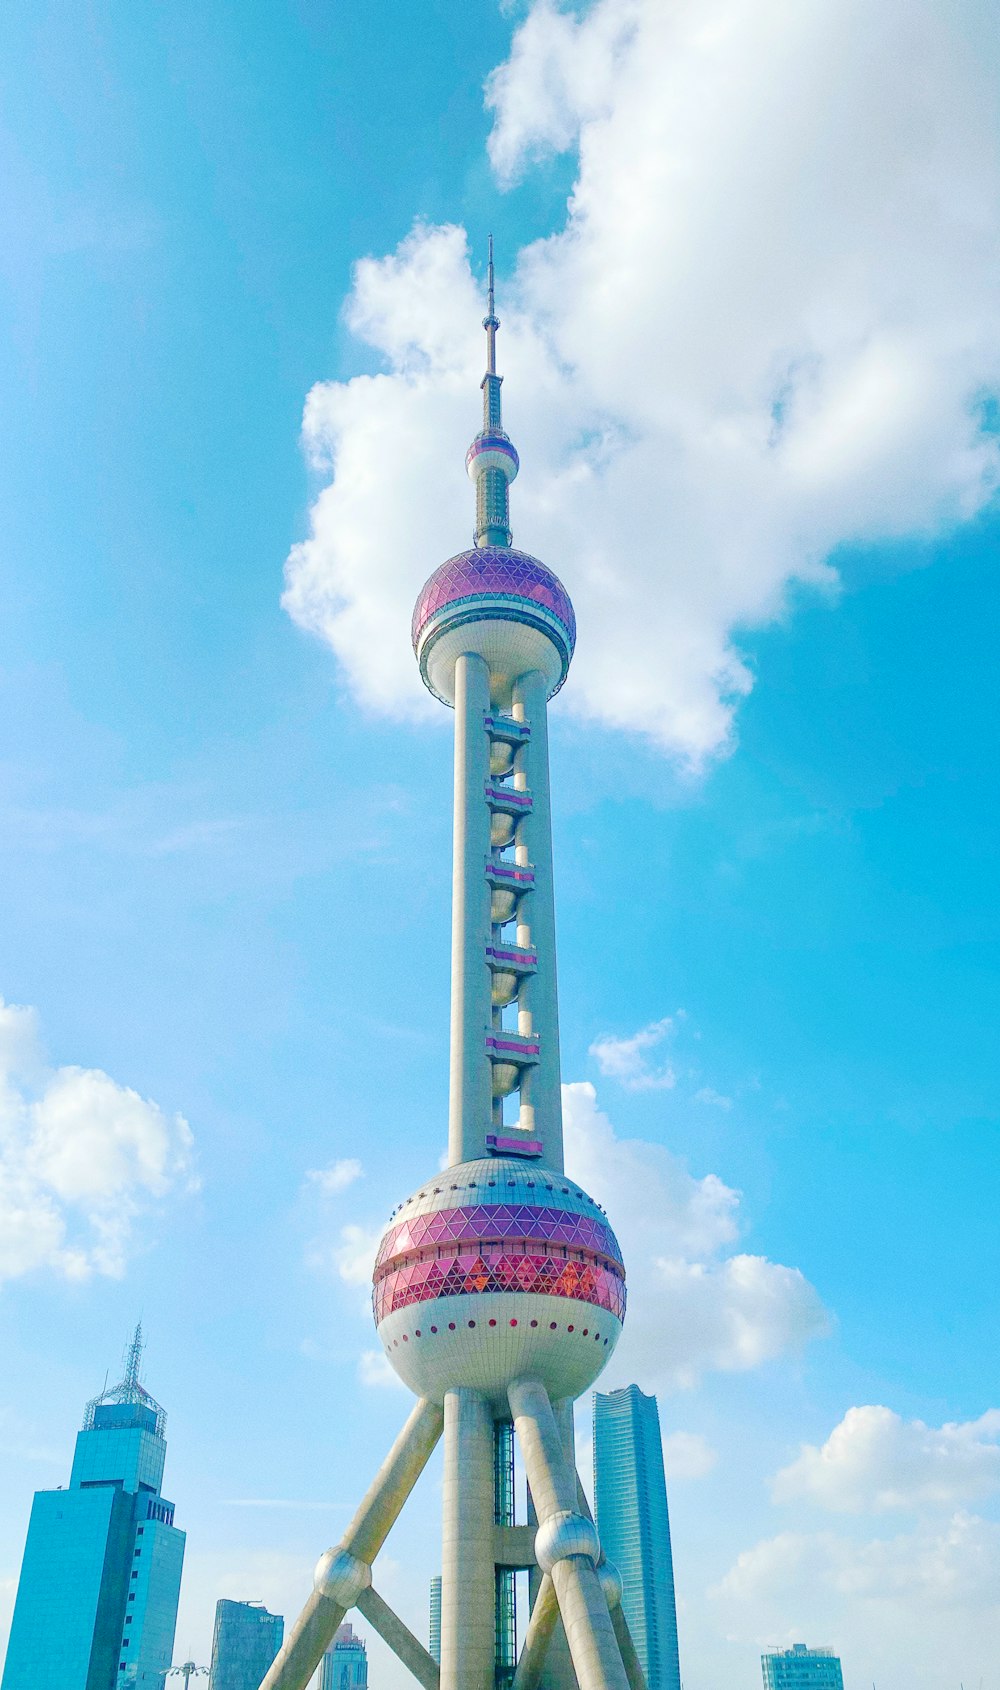 white and pink concrete tower under blue sky during daytime